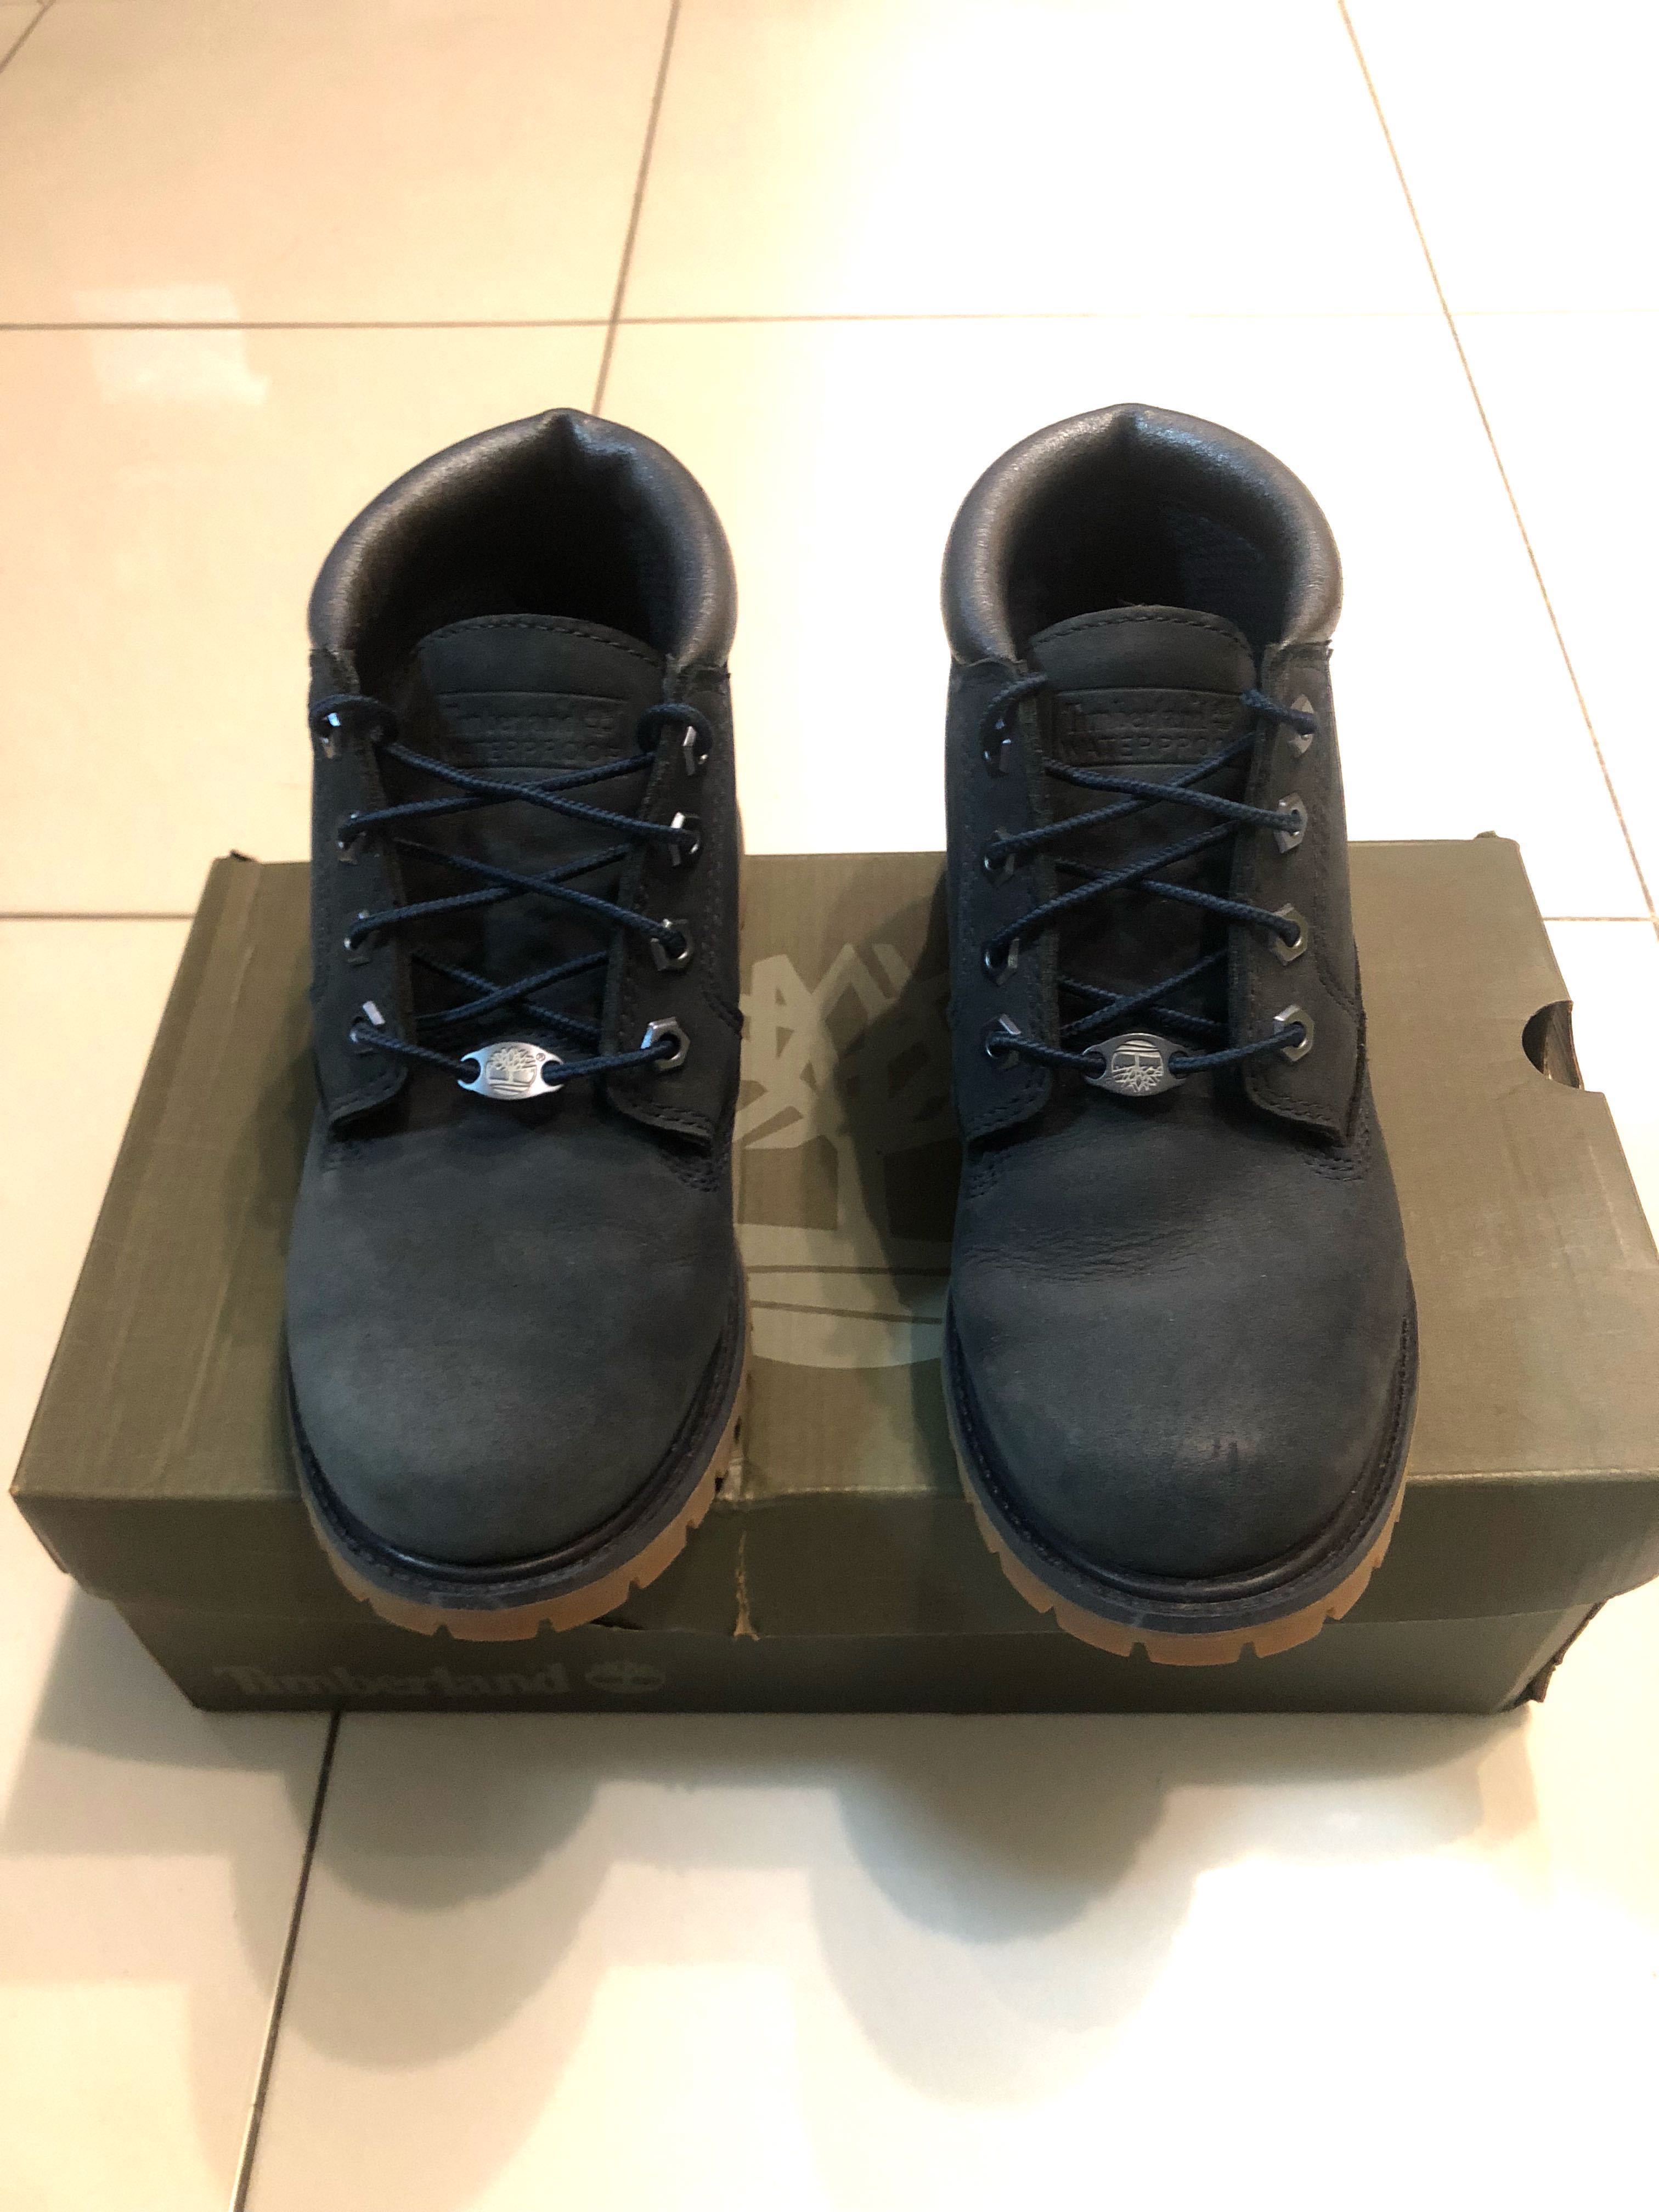 timberland nellie boots sale